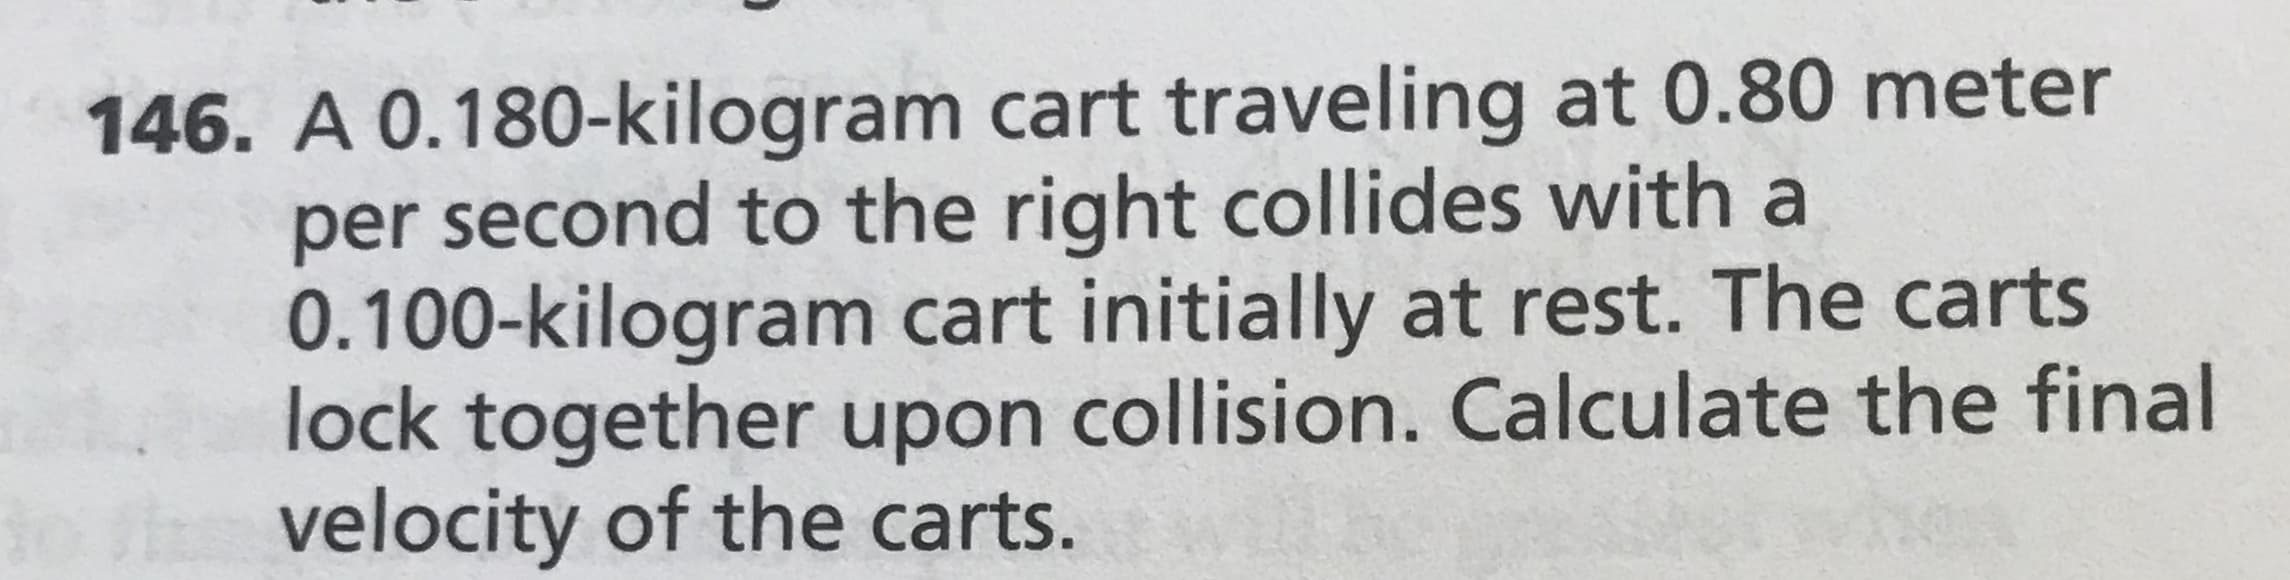 146. A 0.180-kilogram cart traveling at 0.80 meter
per second to the right collides with a
0.100-kilogram cart initially at rest. The carts
lock together upon collision. Calculate the final
oth velocity of the carts.
